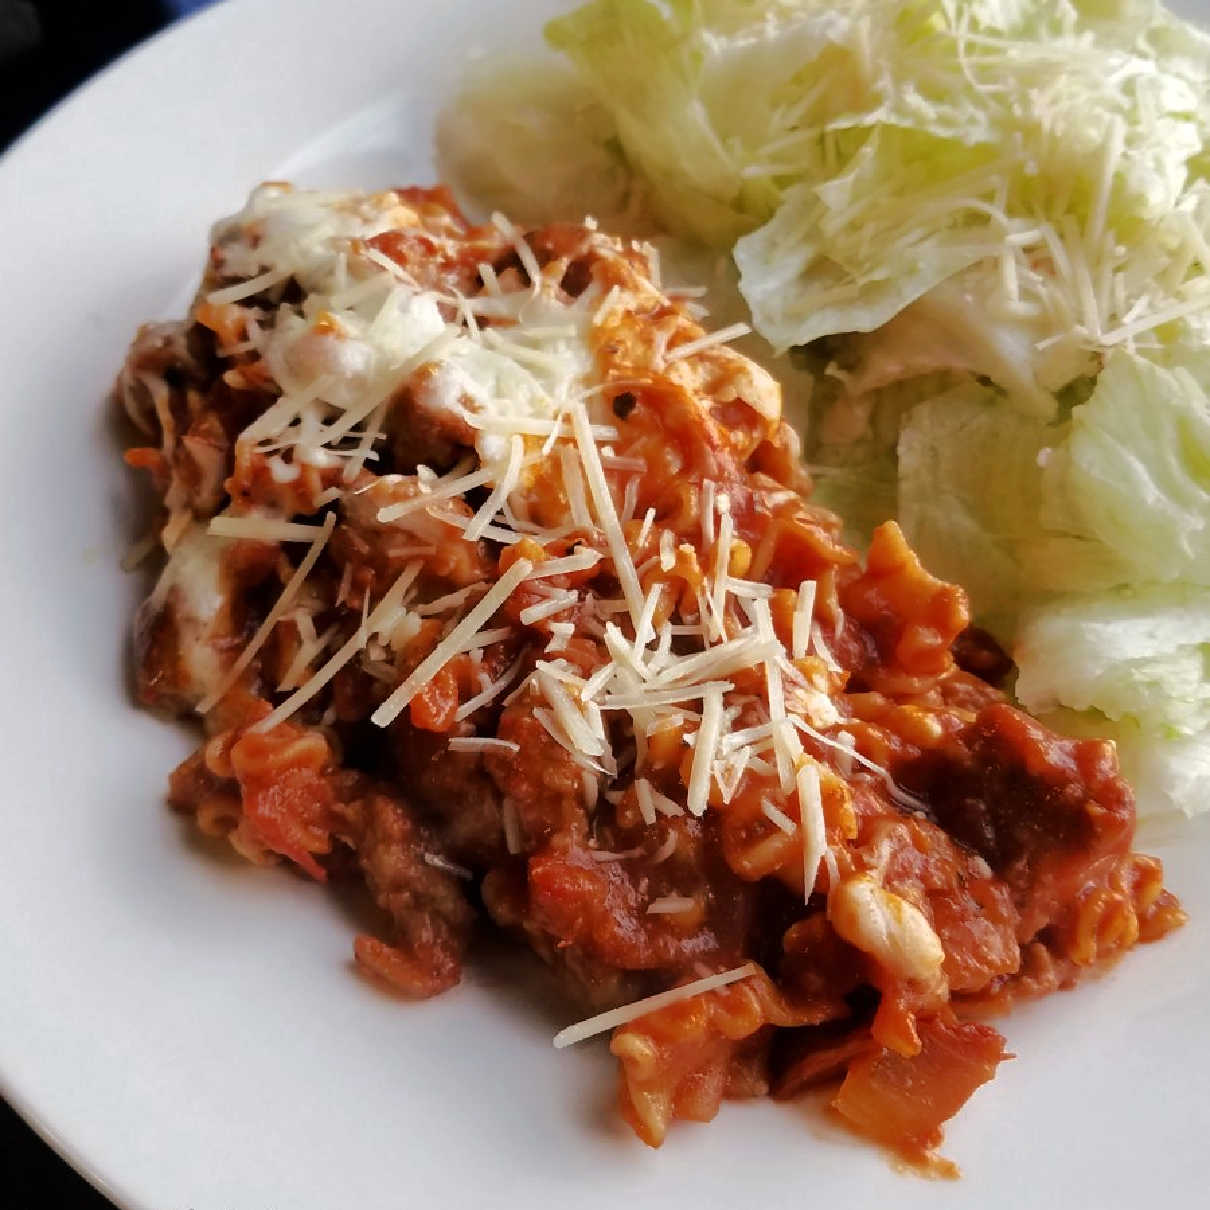 serving of skillet lasagna with shredded parmesan and salad on a plate.